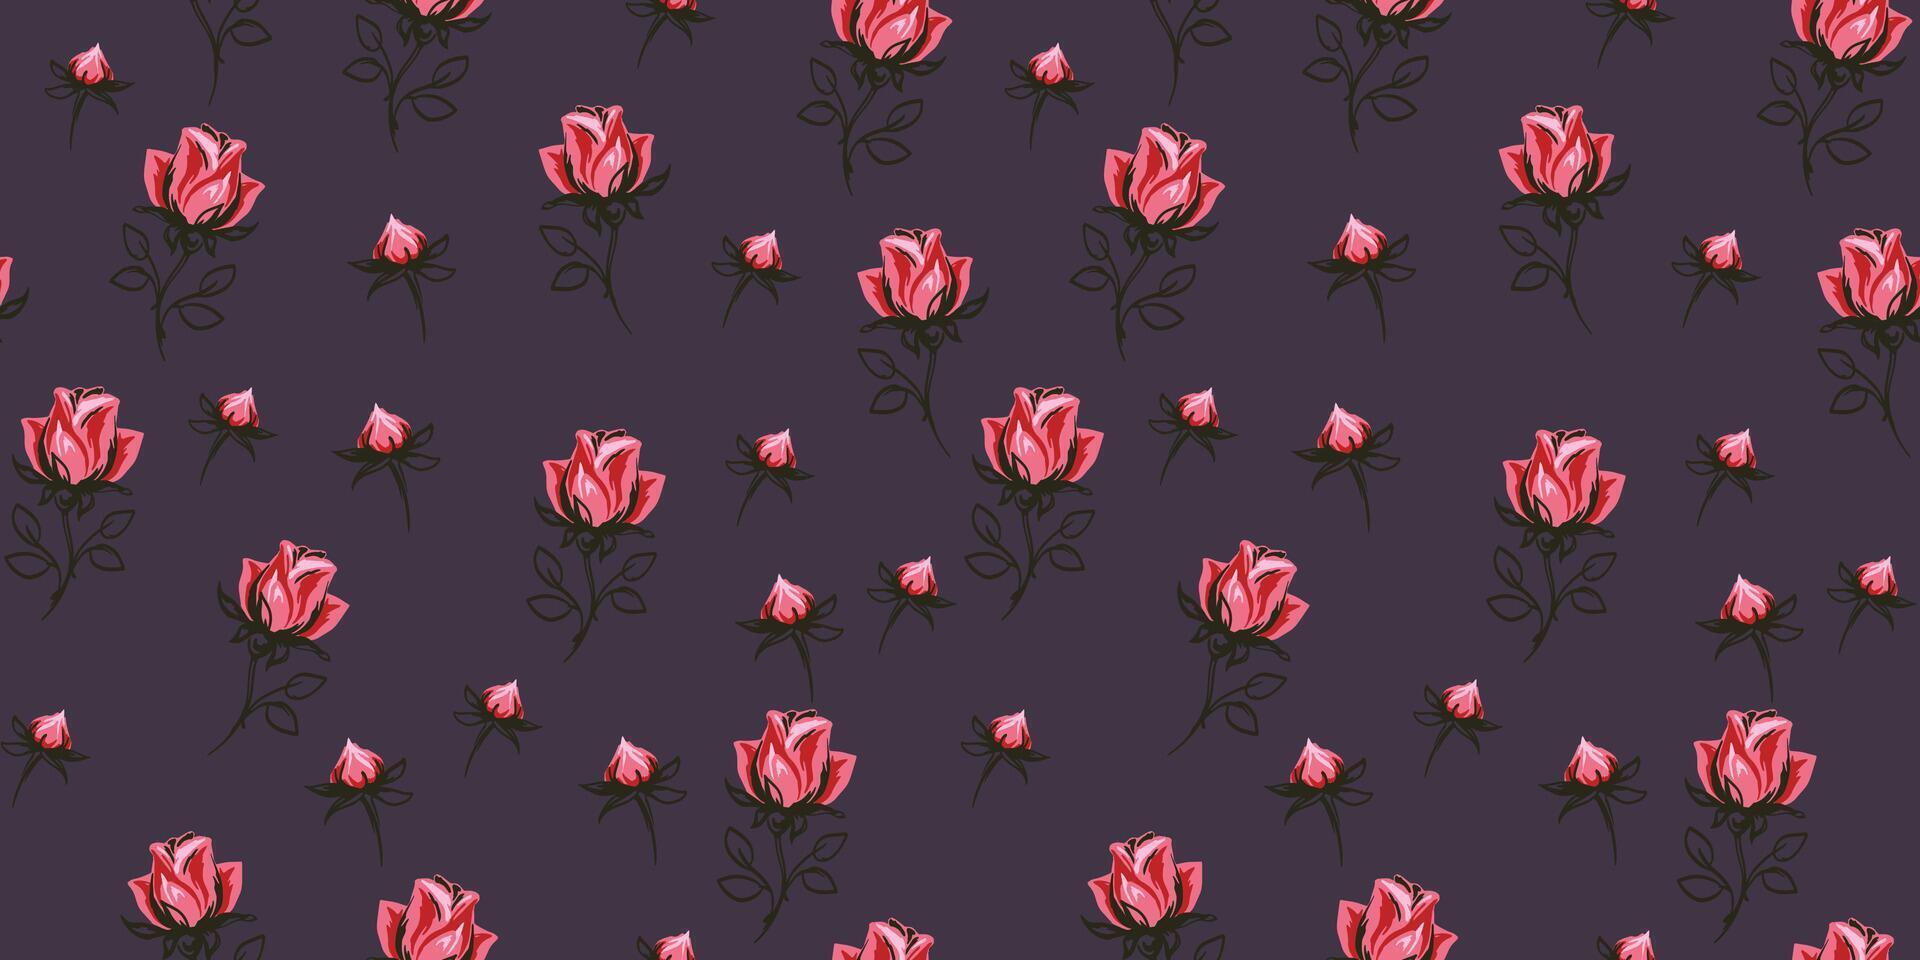 Seamless pattern with creative stylized flowers roses, tiny rosebuds, buds on a dark background. Vector hand drawn sketch. Abstract ditsy cute floral printing.Template for designs, collage, printing